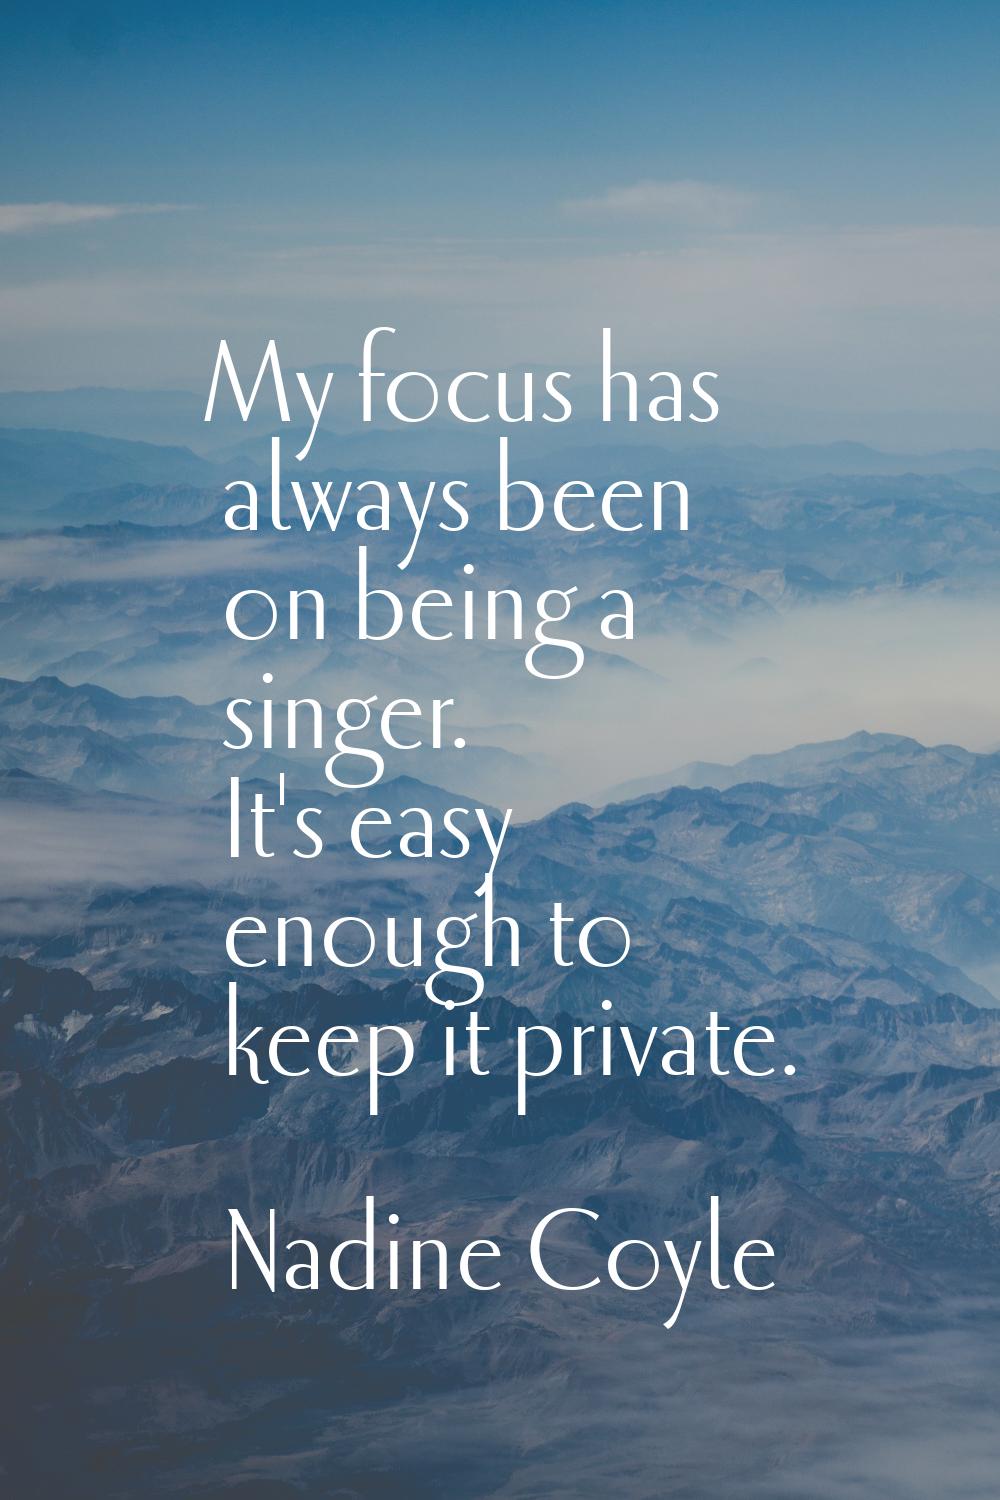 My focus has always been on being a singer. It's easy enough to keep it private.